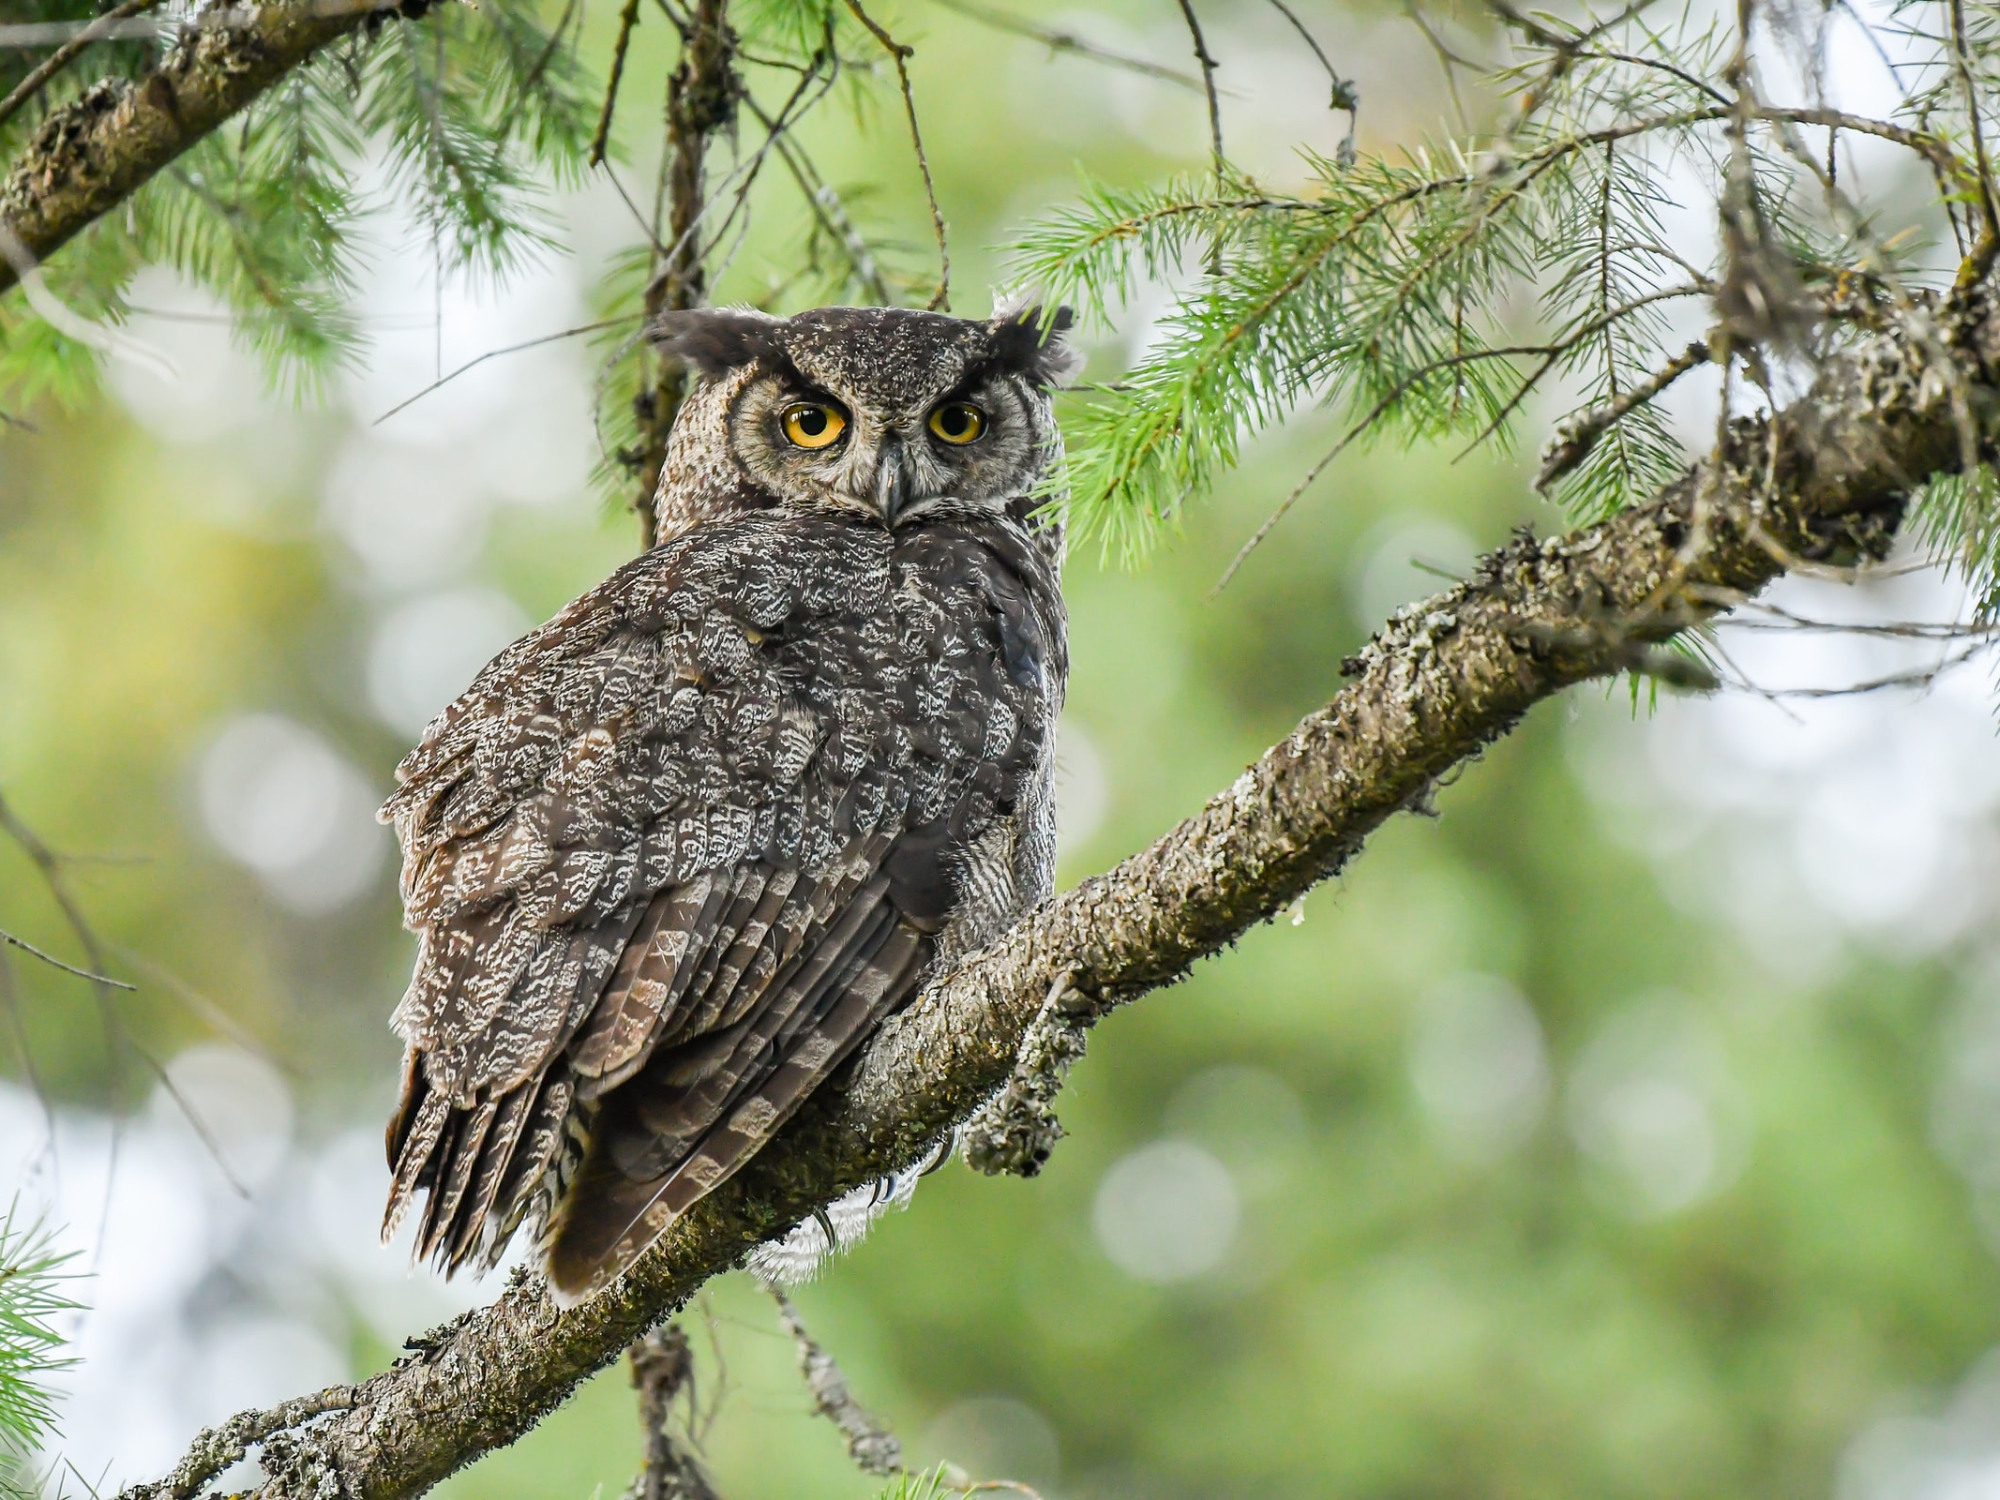 An owl sitting on the branch of an evergreen tree in the forest.